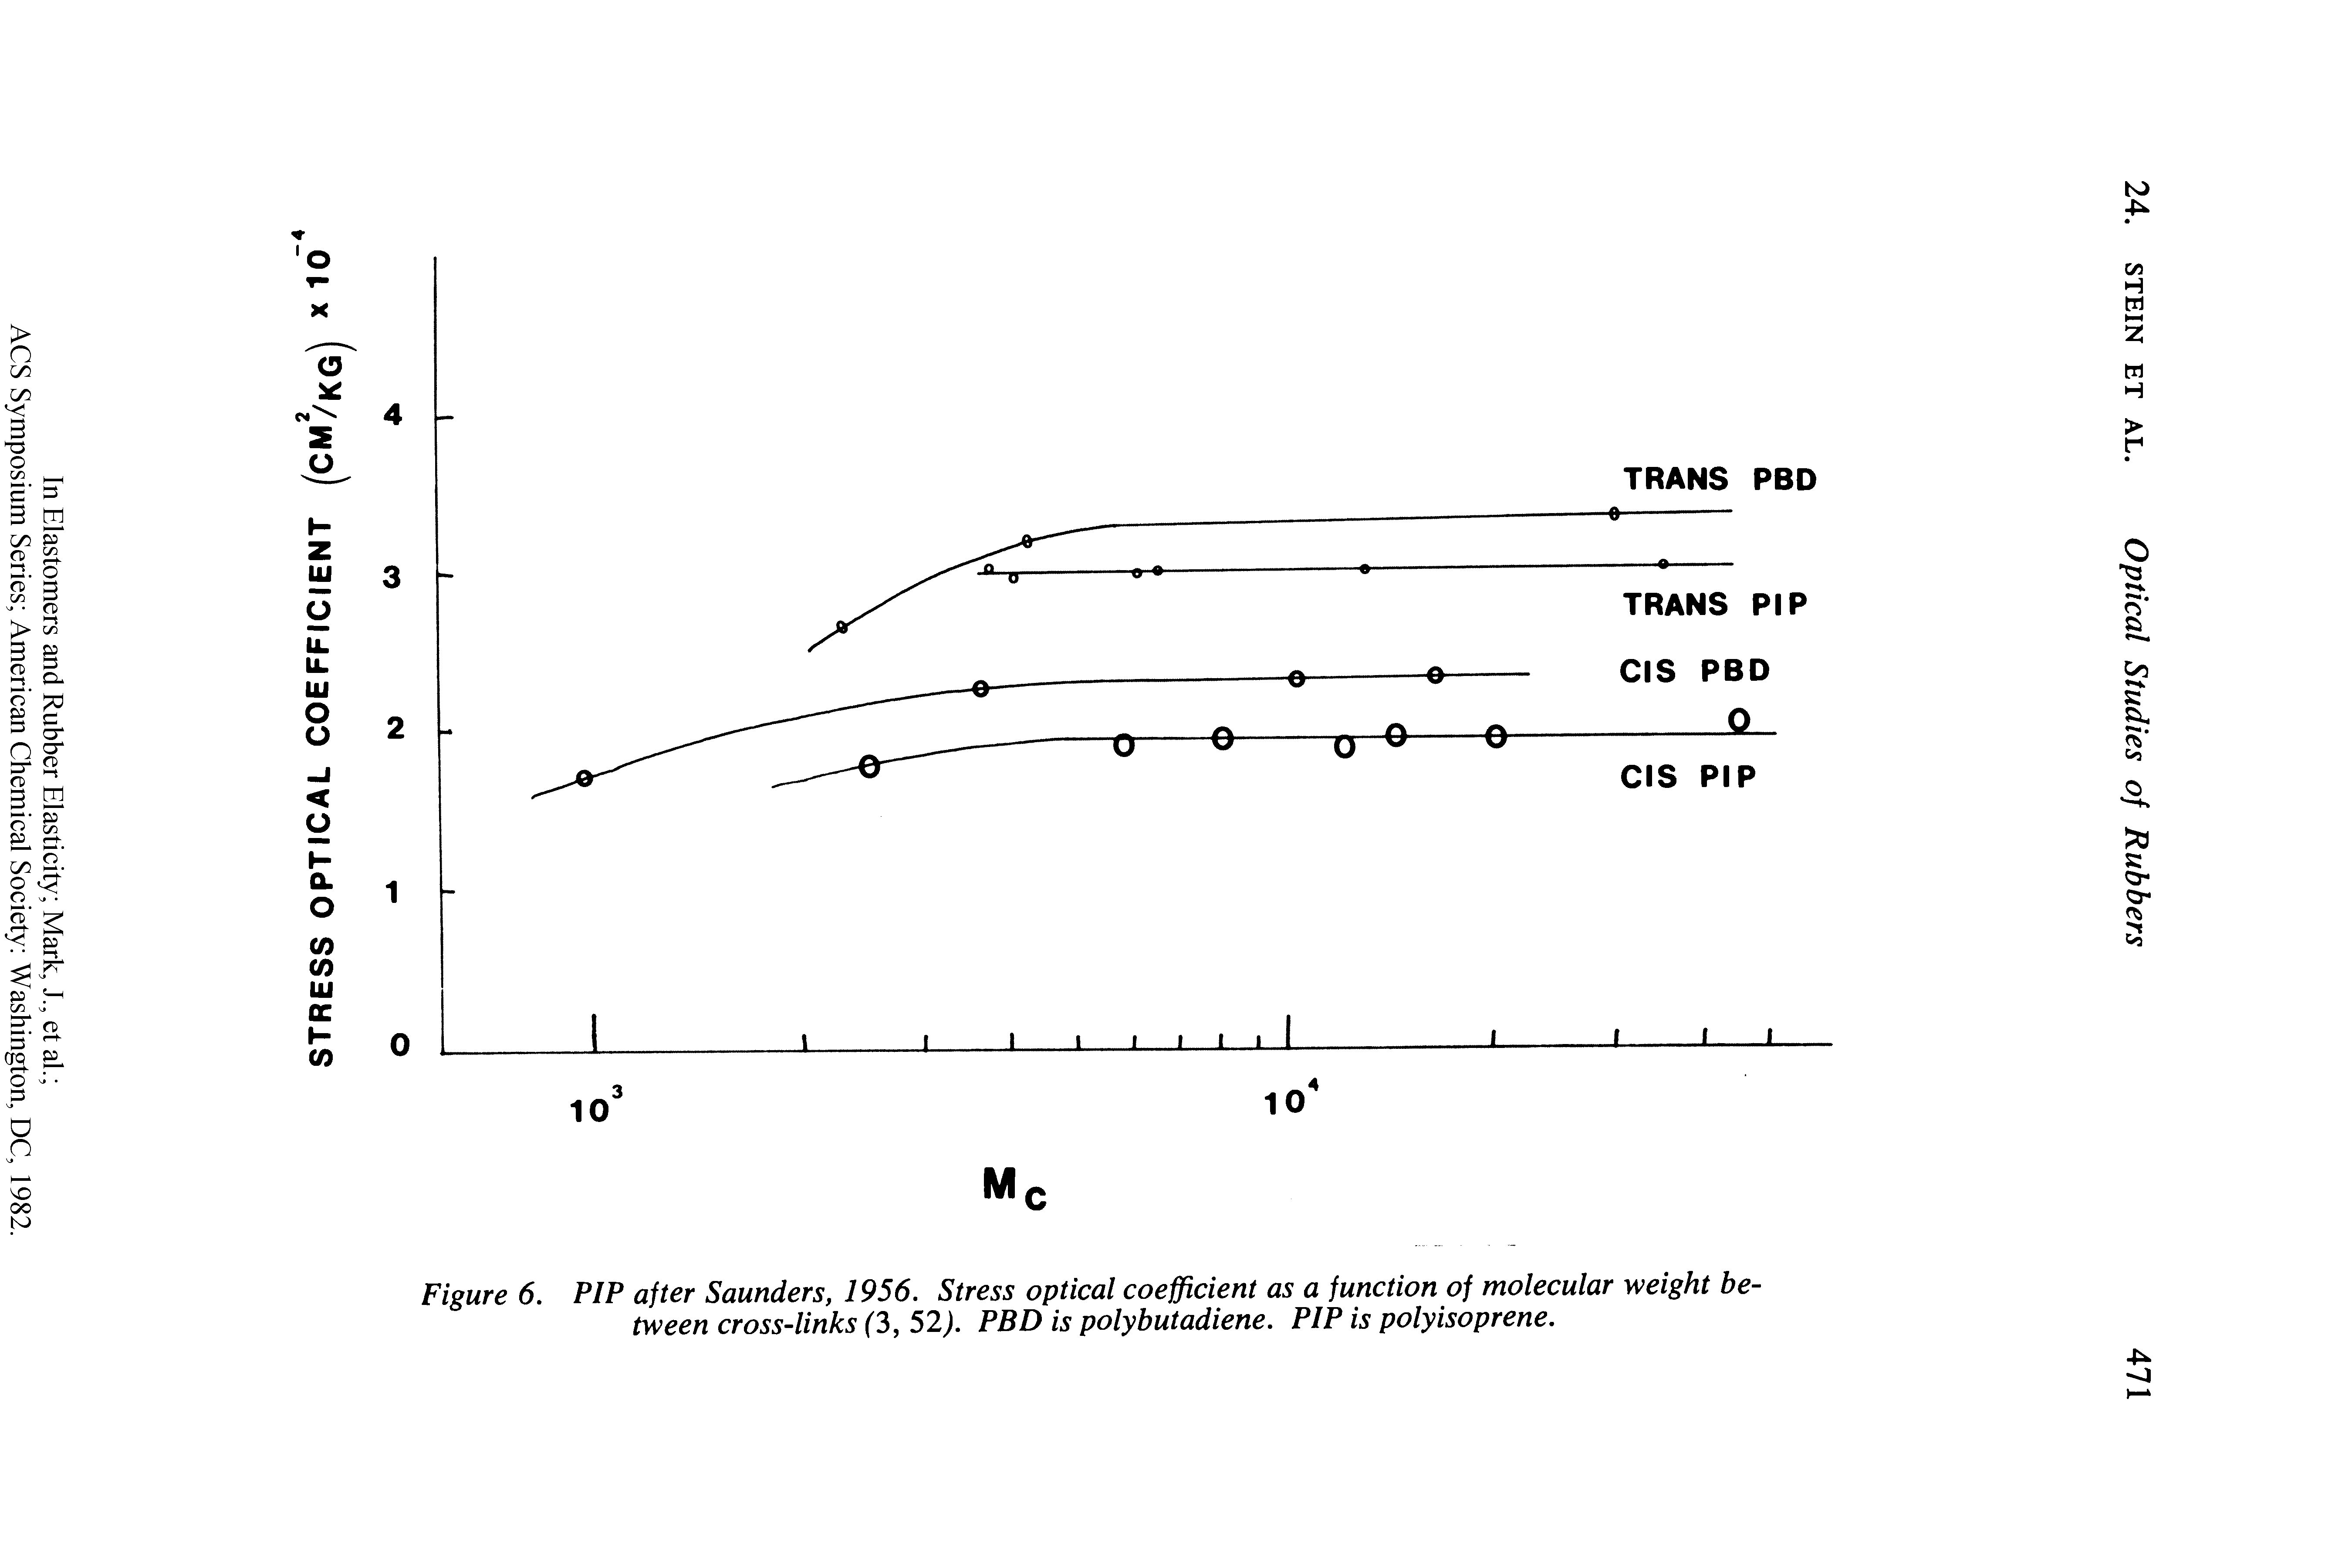 Figure 6. PIP after Saunders, 1956. Stress optical coefficient as a function of molecular weight between cross-links (3, 52). PBD is polybutadiene. PIP is polyisoprene.